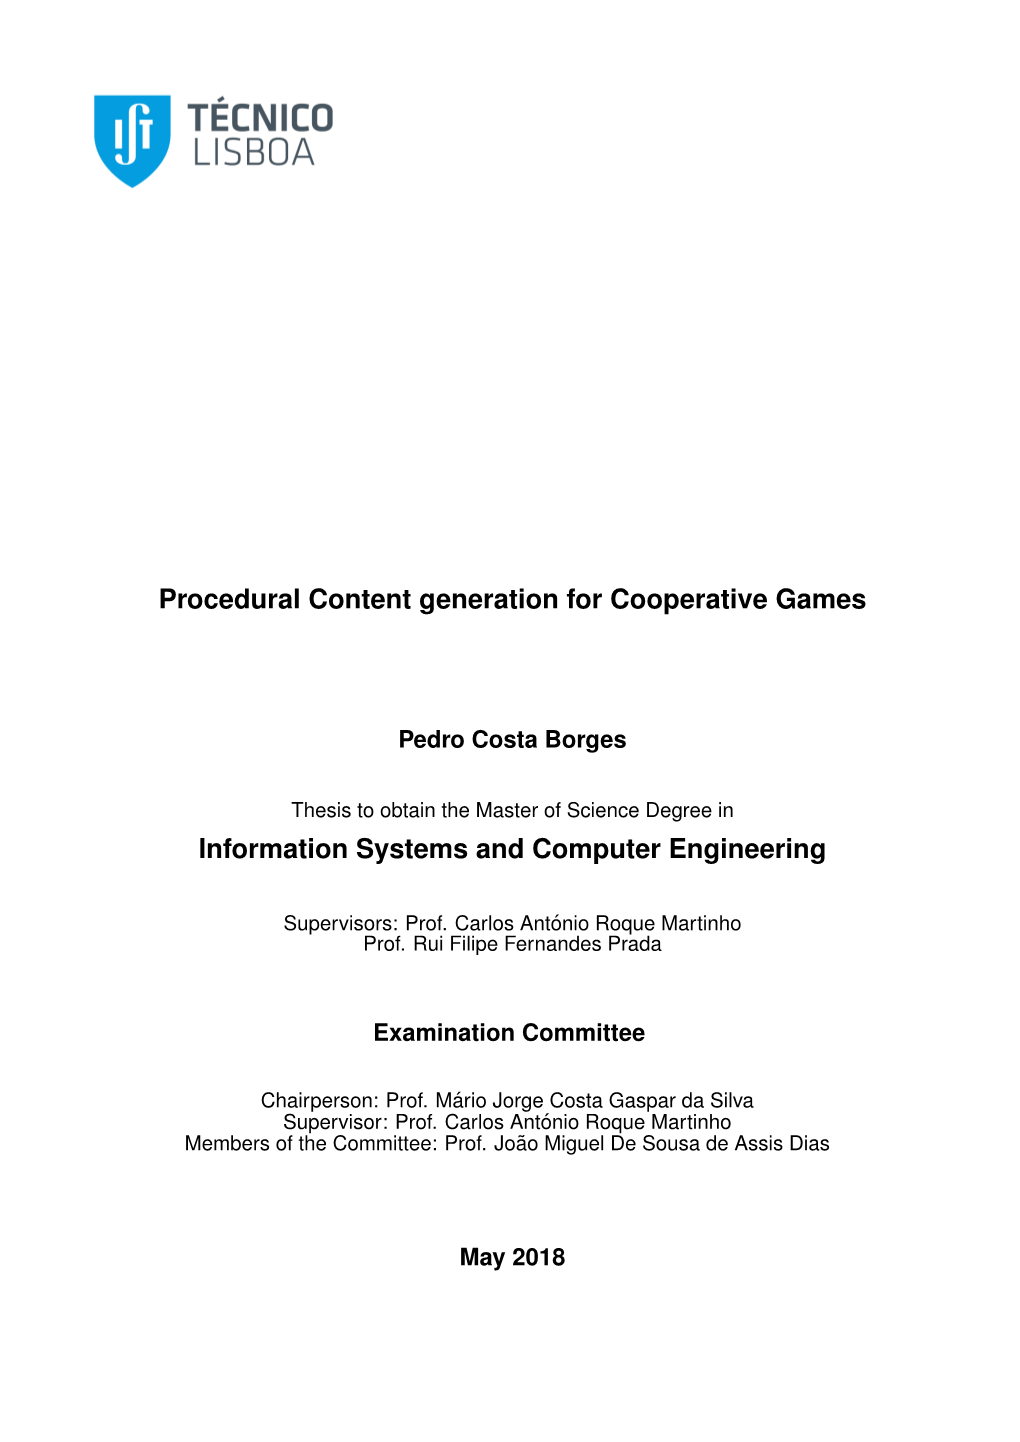 Procedural Content Generation for Cooperative Games Information